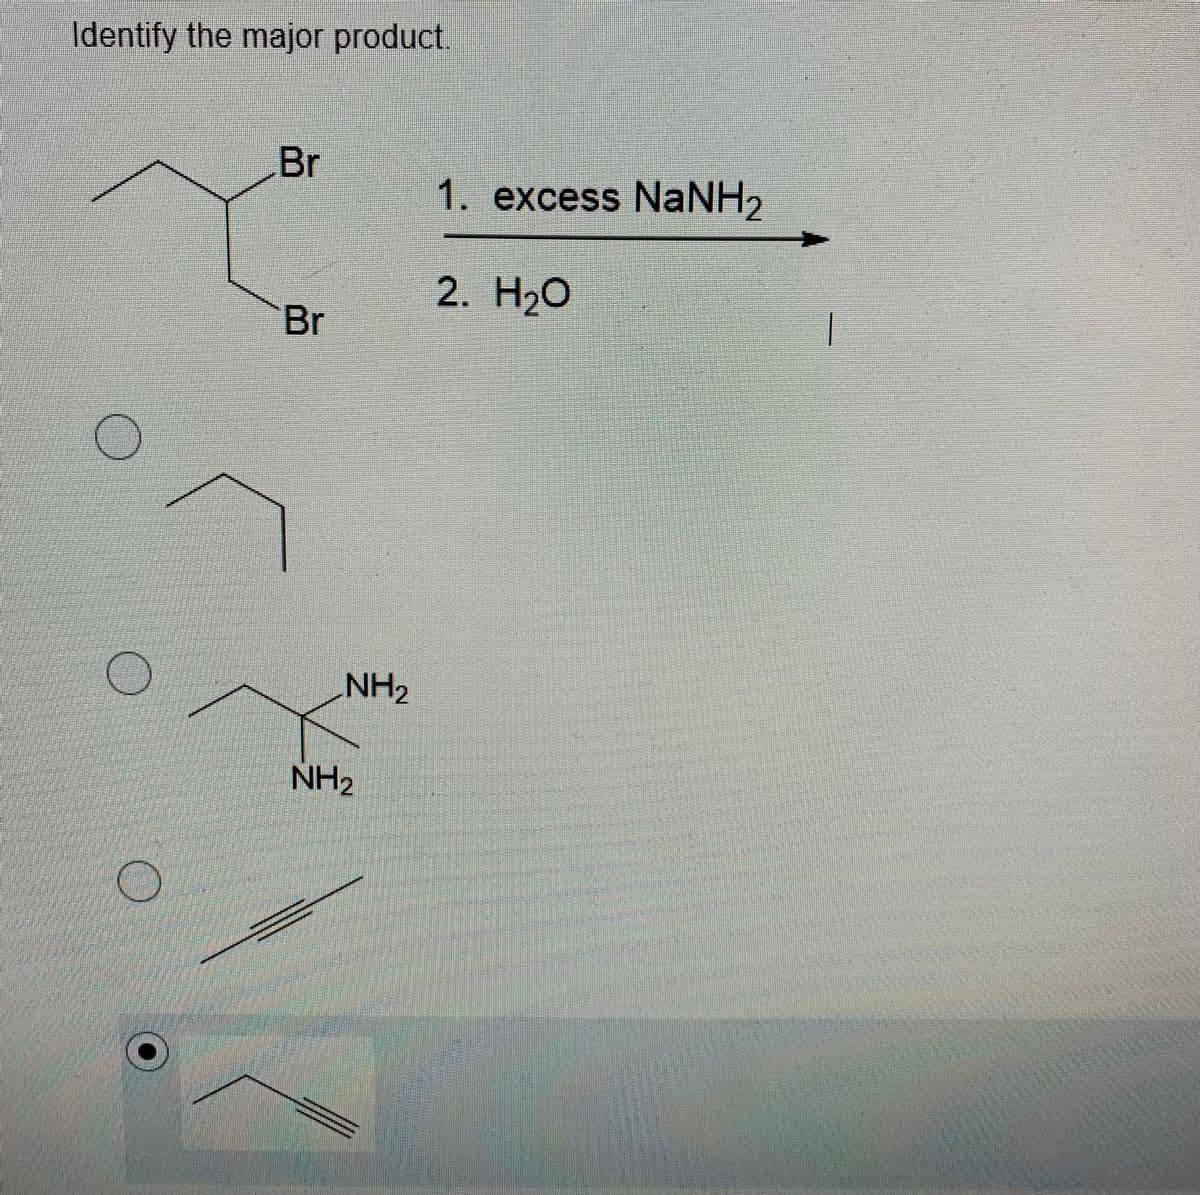 Identify the major product.
Br
1. excess NaNH2
2. H2O
Br
NH2
NH2
